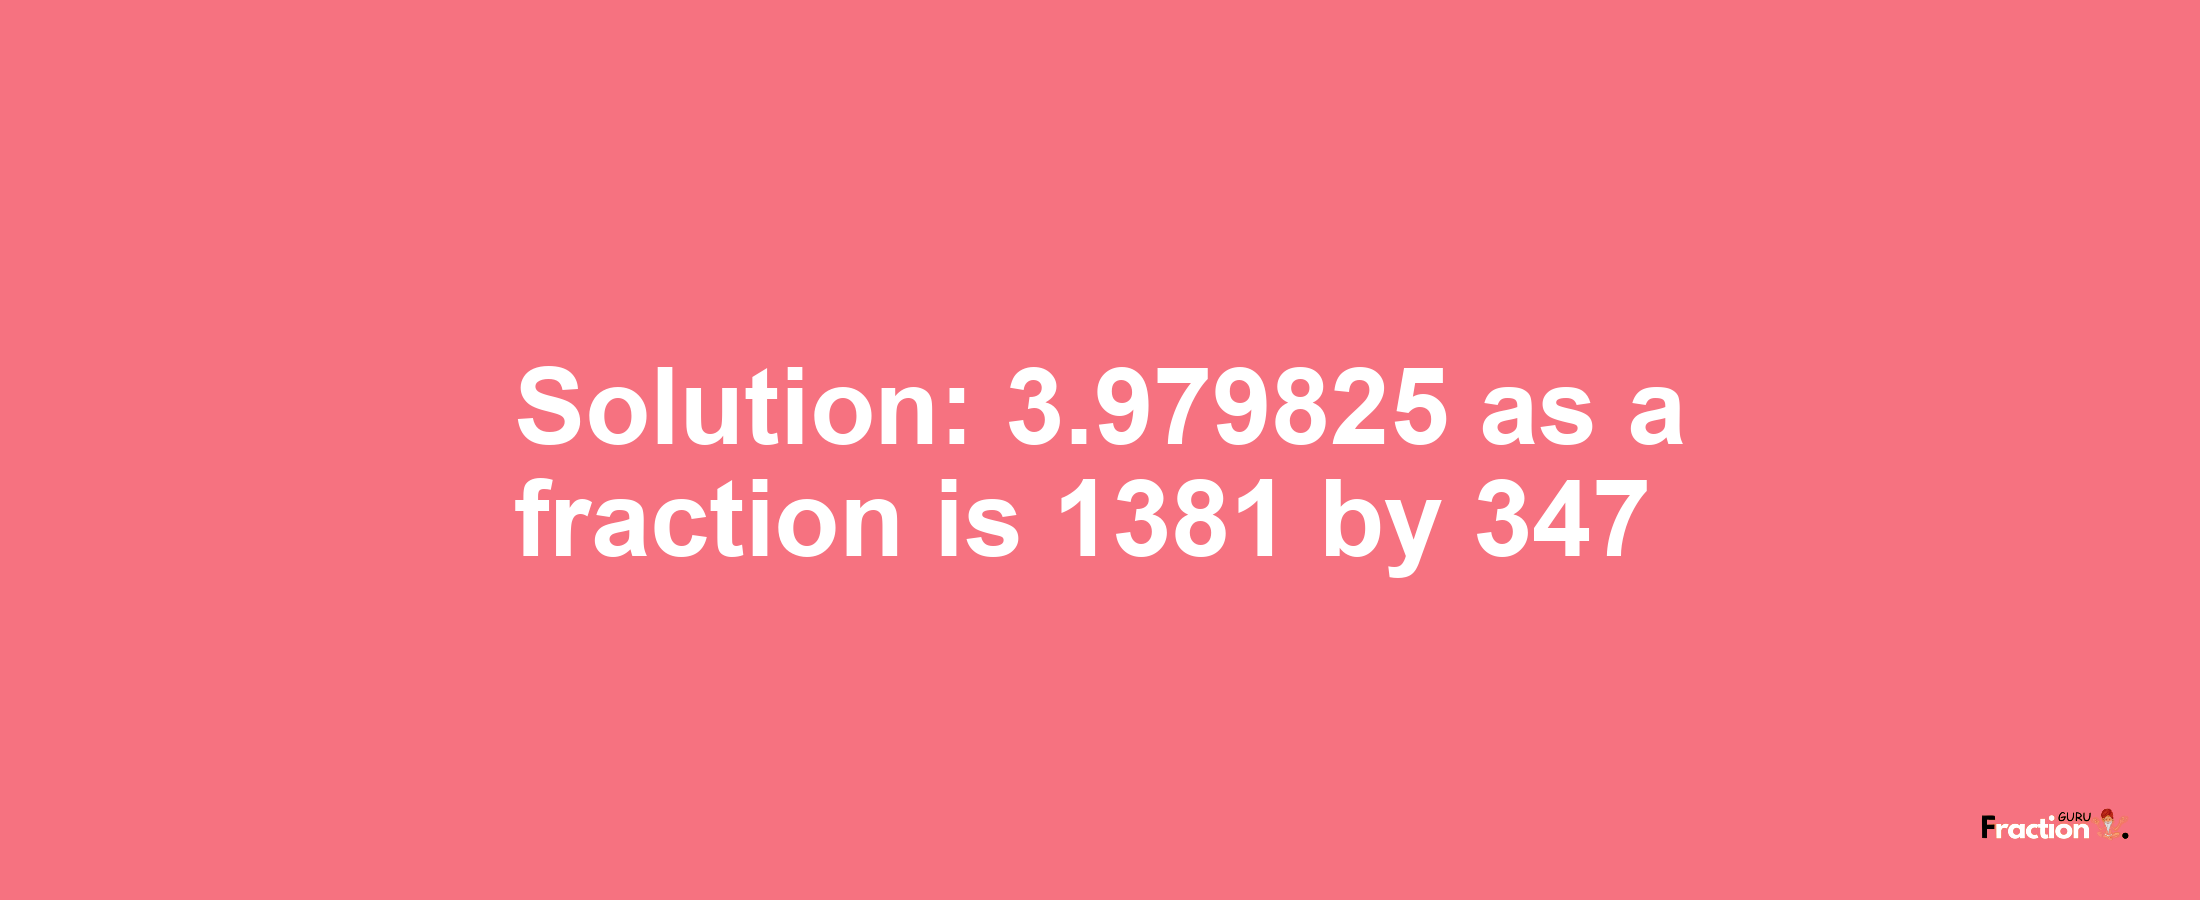 Solution:3.979825 as a fraction is 1381/347